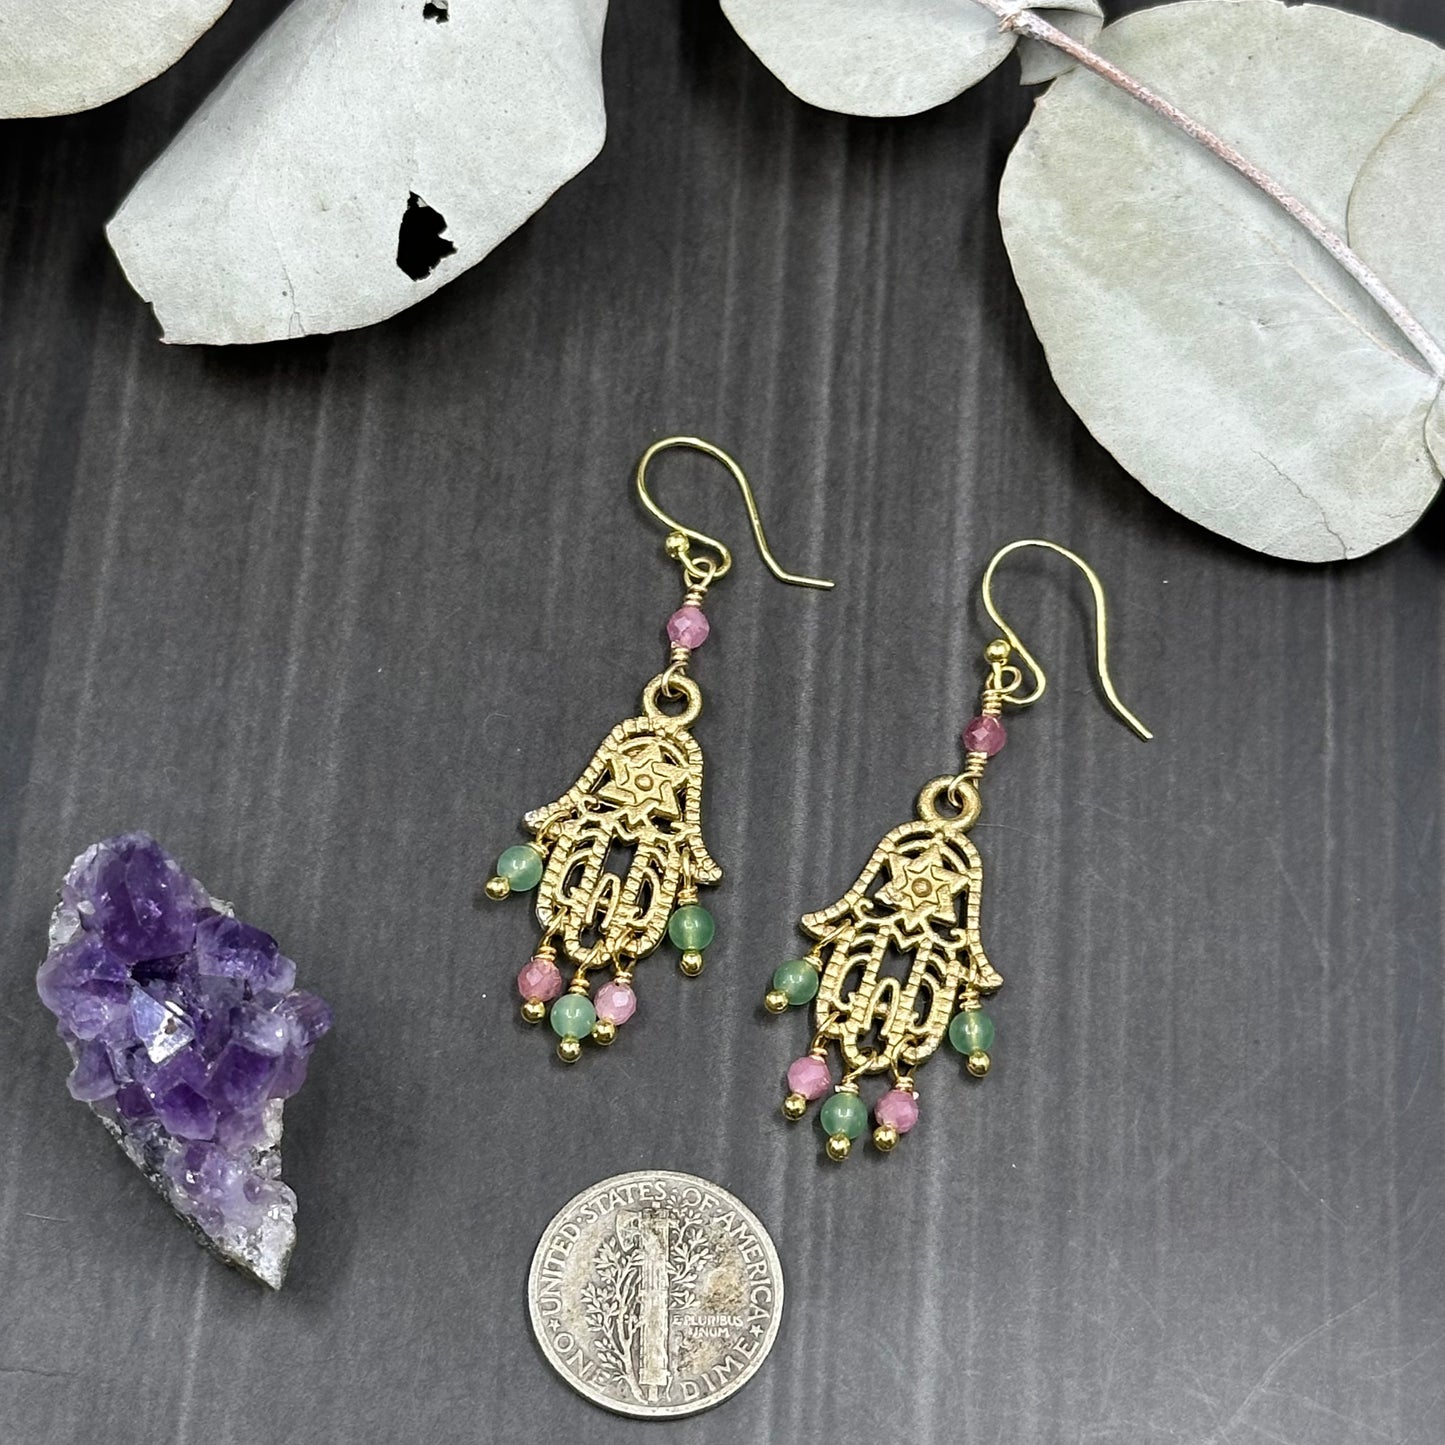 Gold Colored Hamsa Earrings with Pink Tourmaline and Green Aventurine